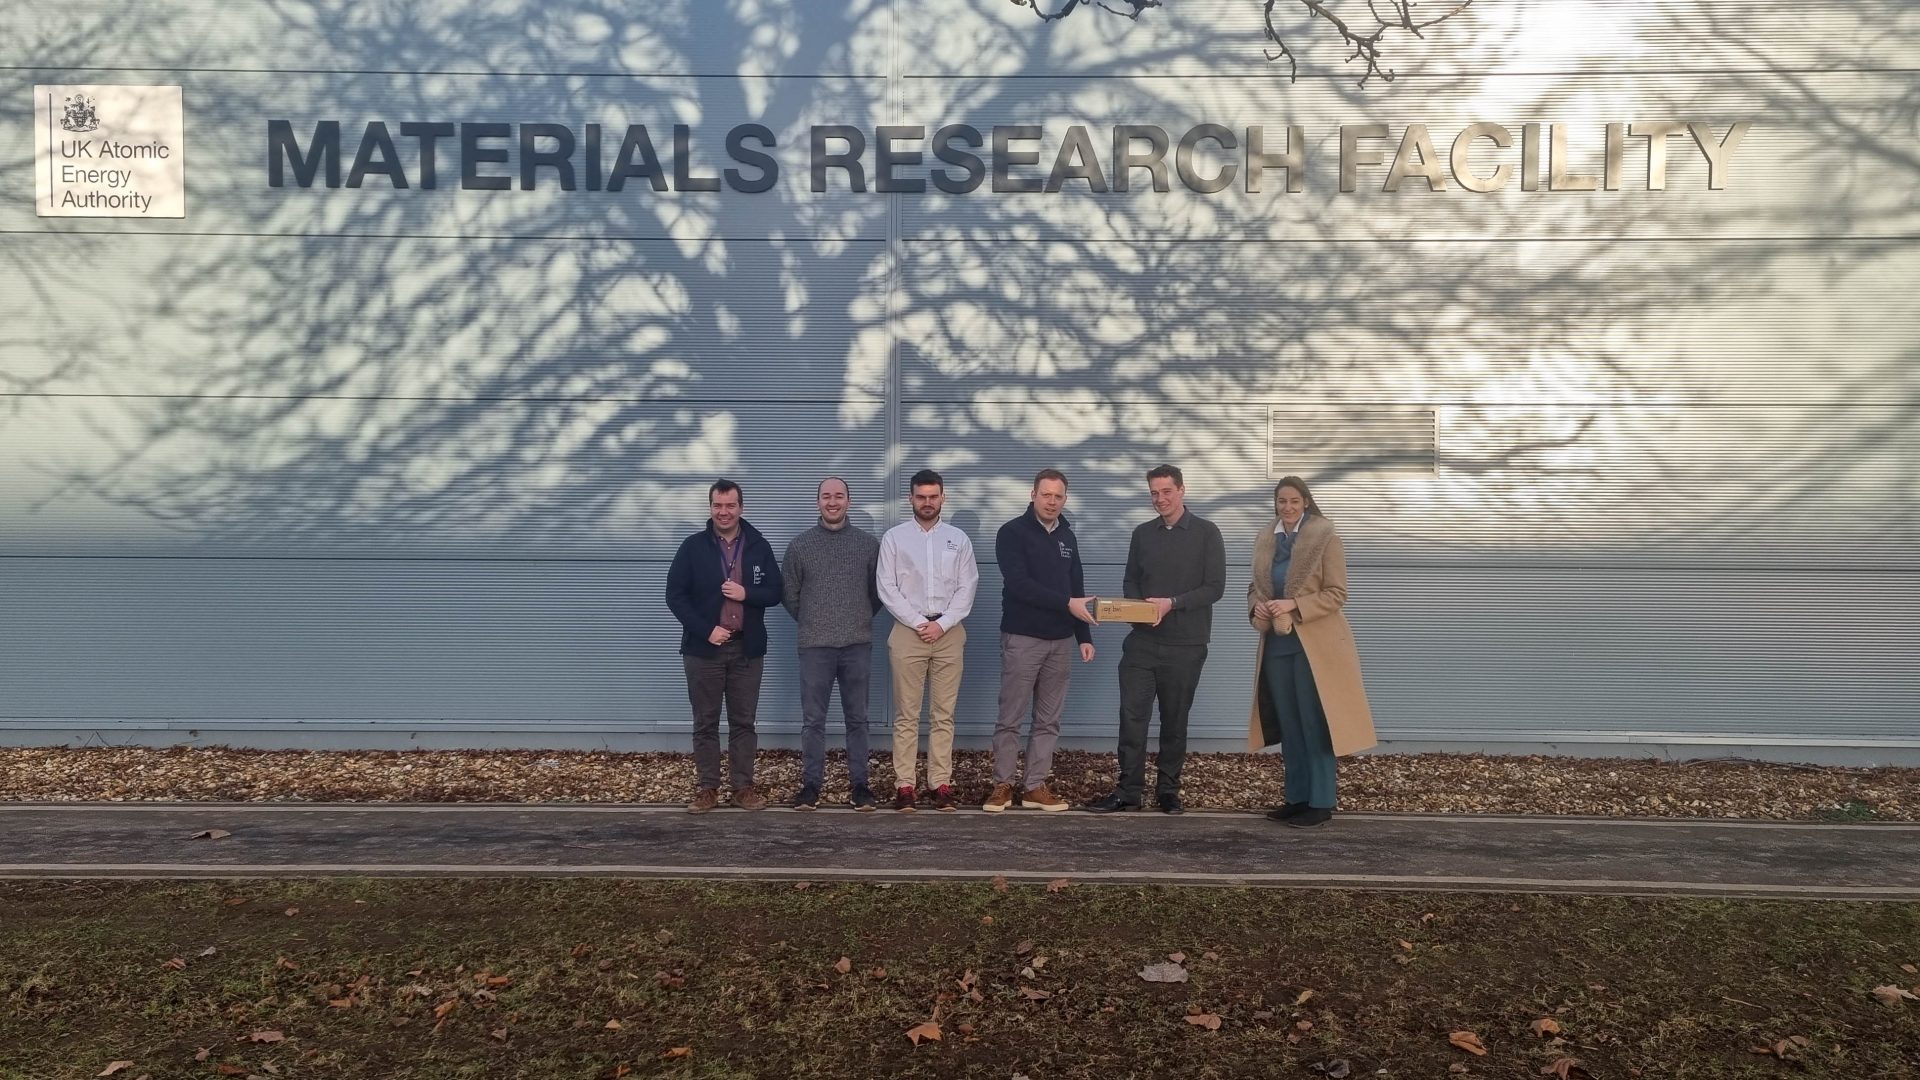 A specimen of ‘fusion grade’ silicon carbide composite made by KF in Japan, being handed over to UKAEA for experimentation. L-R: Dr Alex Leide (UKAEA), Dr Max Rigby-Bell (UKAEA), George Clark (UKAEA), Dr James Wade-Zhu (UKAEA), Andy Wilson (Kyoto Fusioneering), Vojna Ngjeqari (Kyoto Fusioneering).